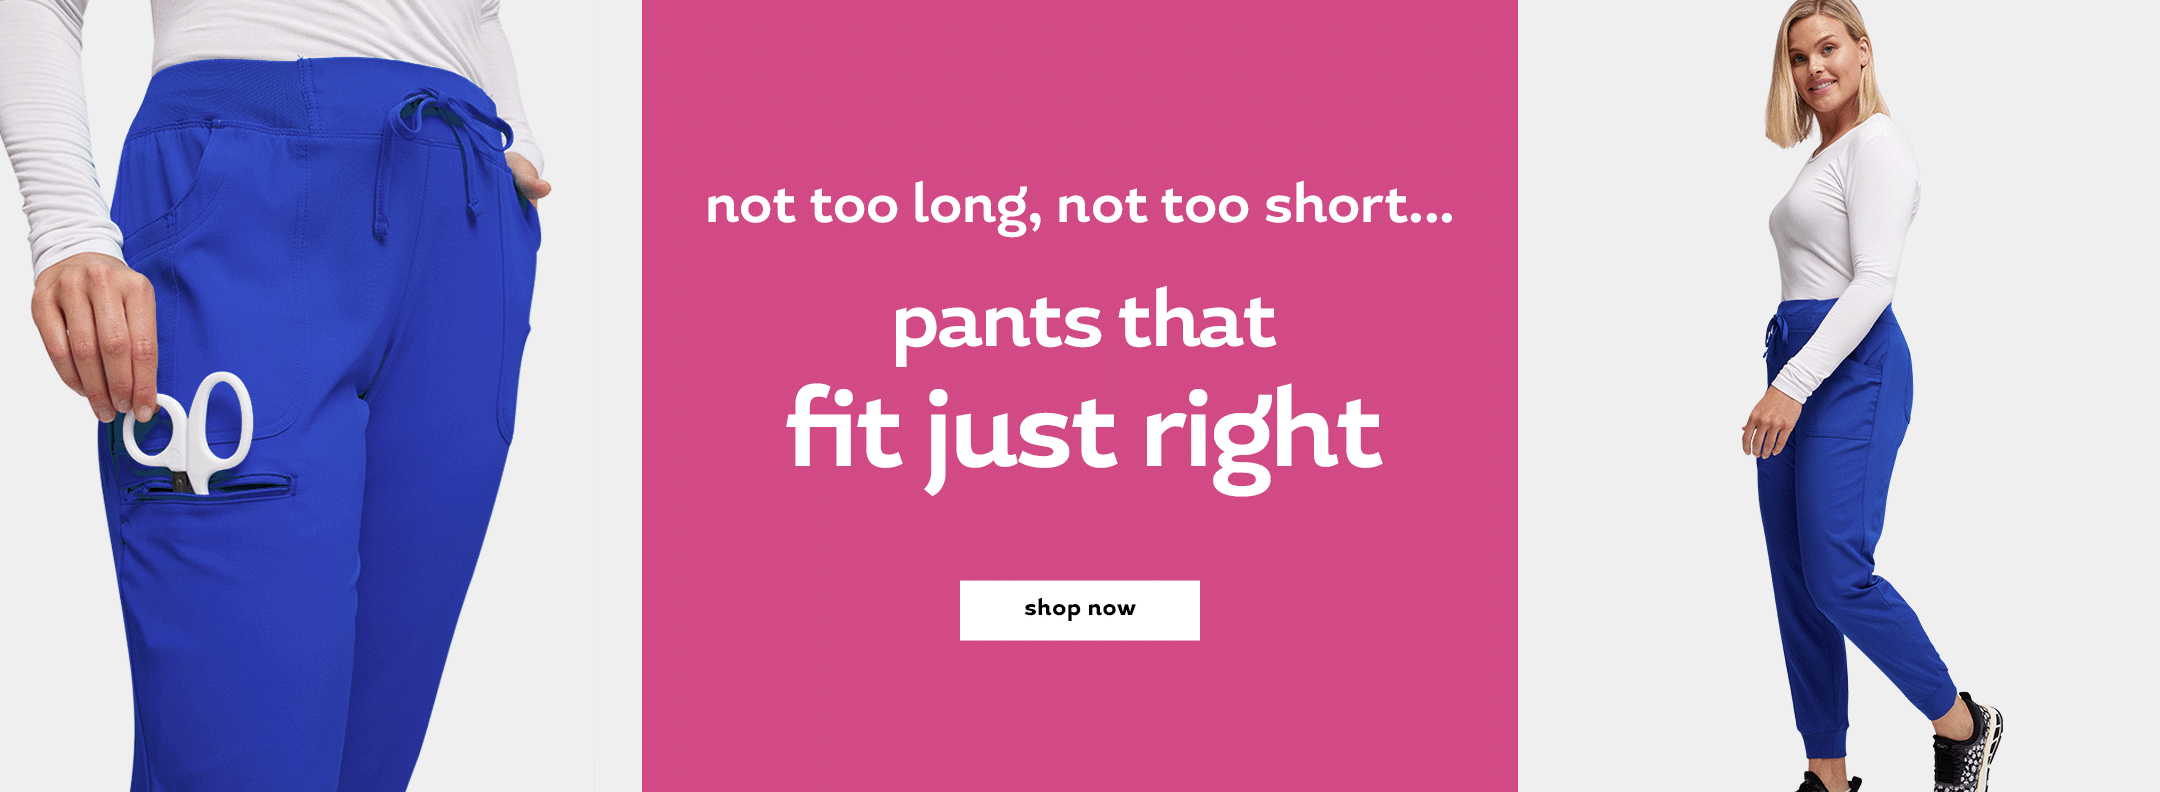 not too long, not too short...
pants that fit just right